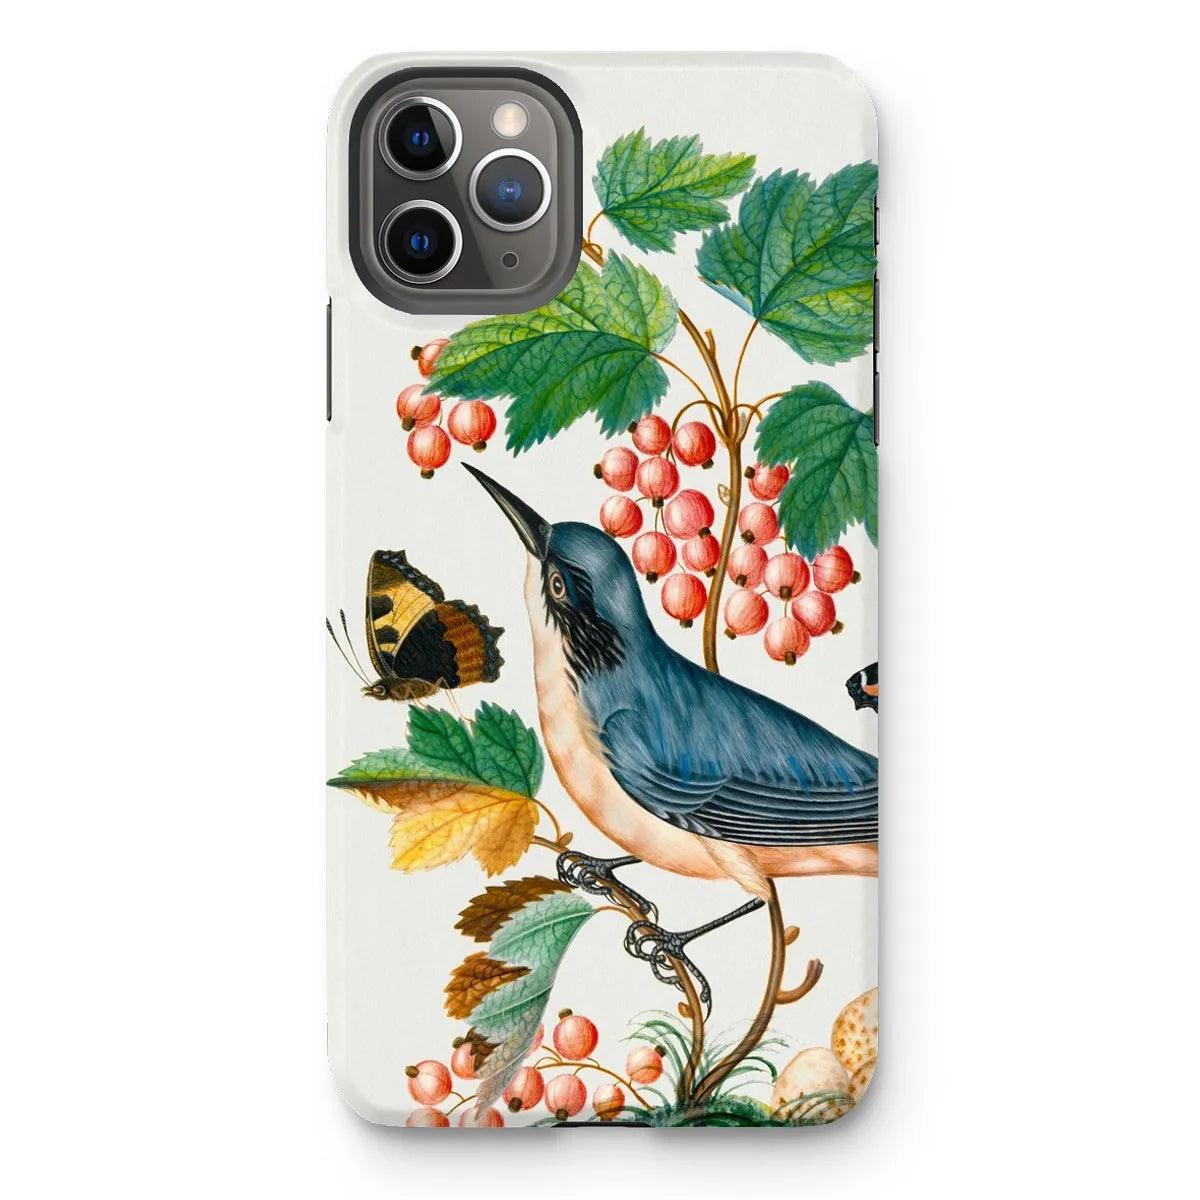 Warbler Admiral Wasps & Ants - Art Phone Case - James Bolton - Iphone 11 Pro Max / Matte - Mobile Phone Cases